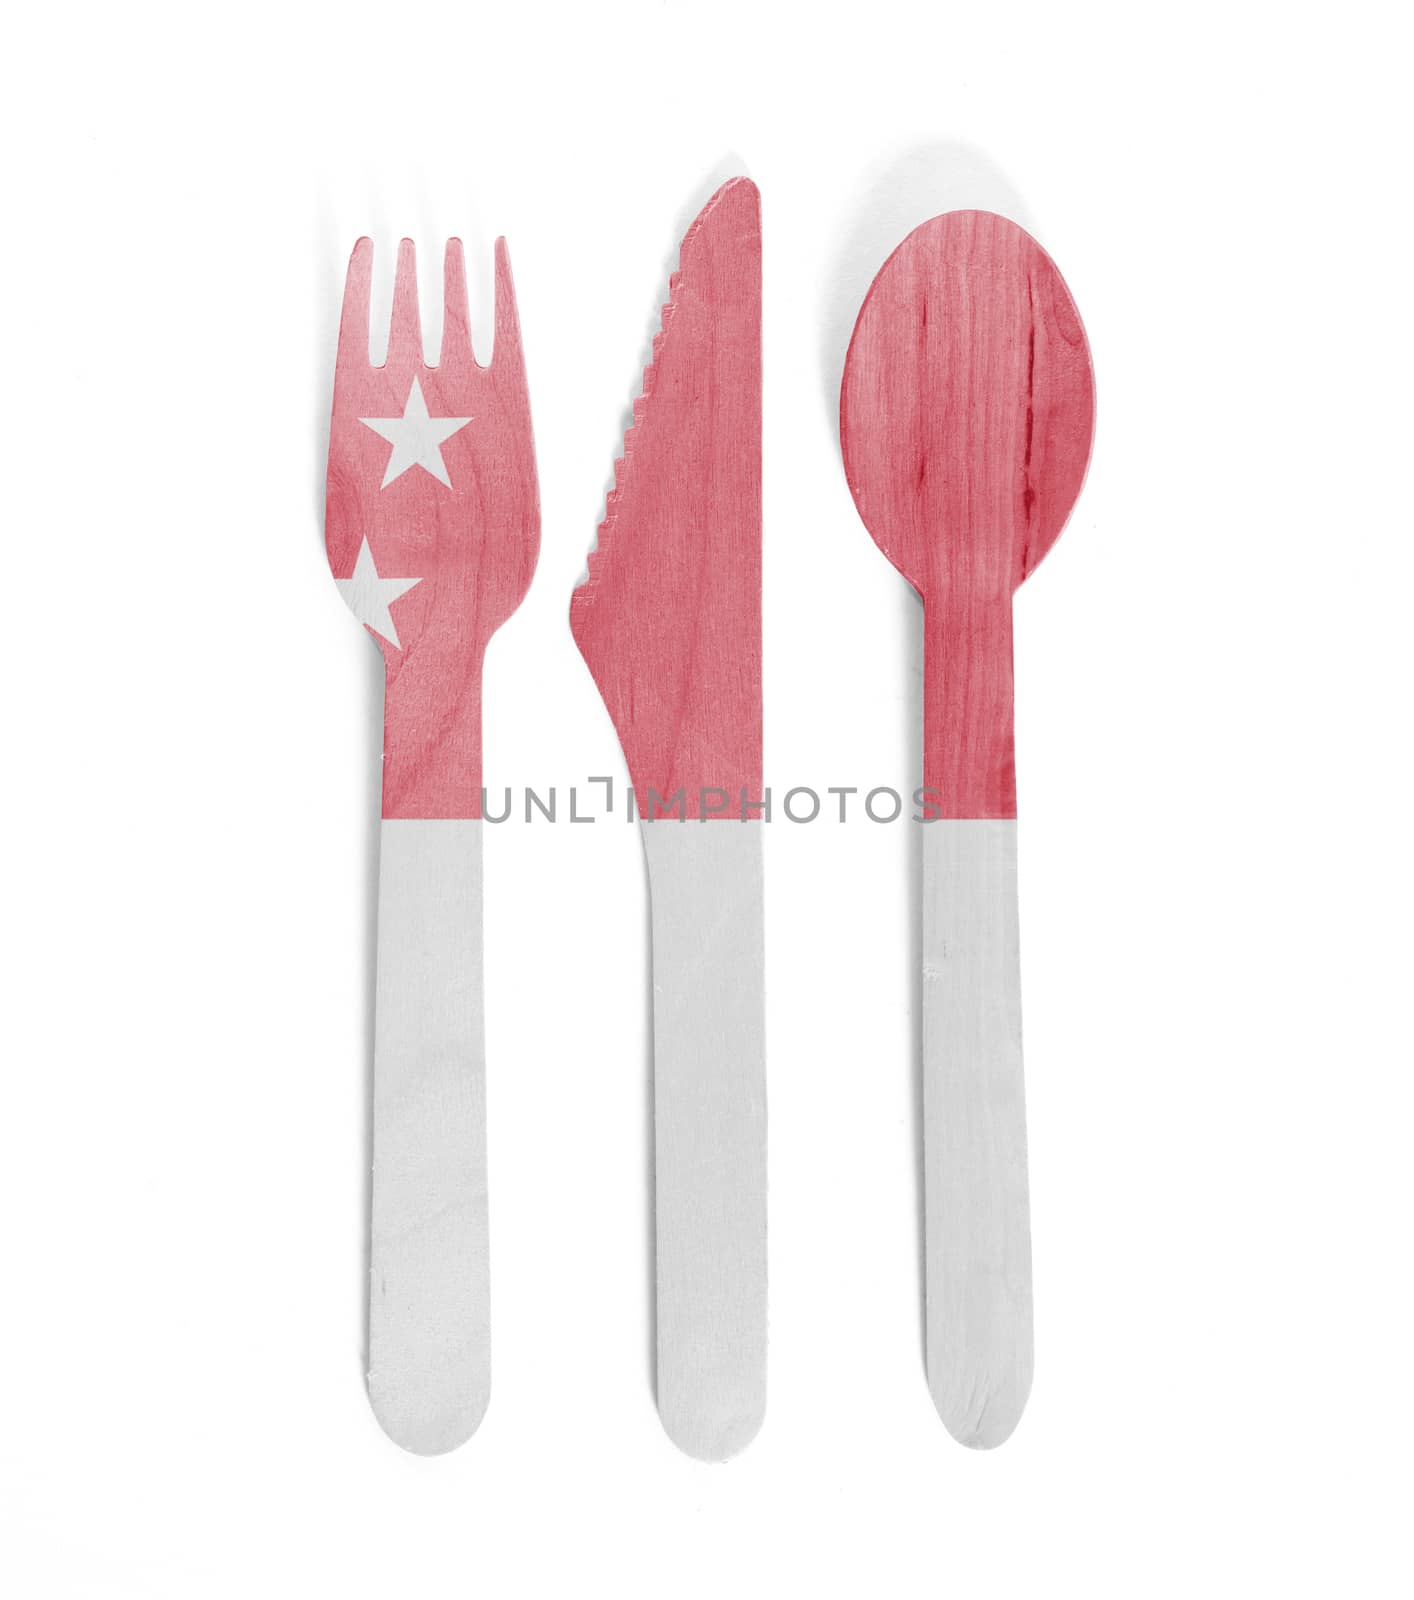 Eco friendly wooden cutlery - Plastic free concept - Flag of Sin by michaklootwijk